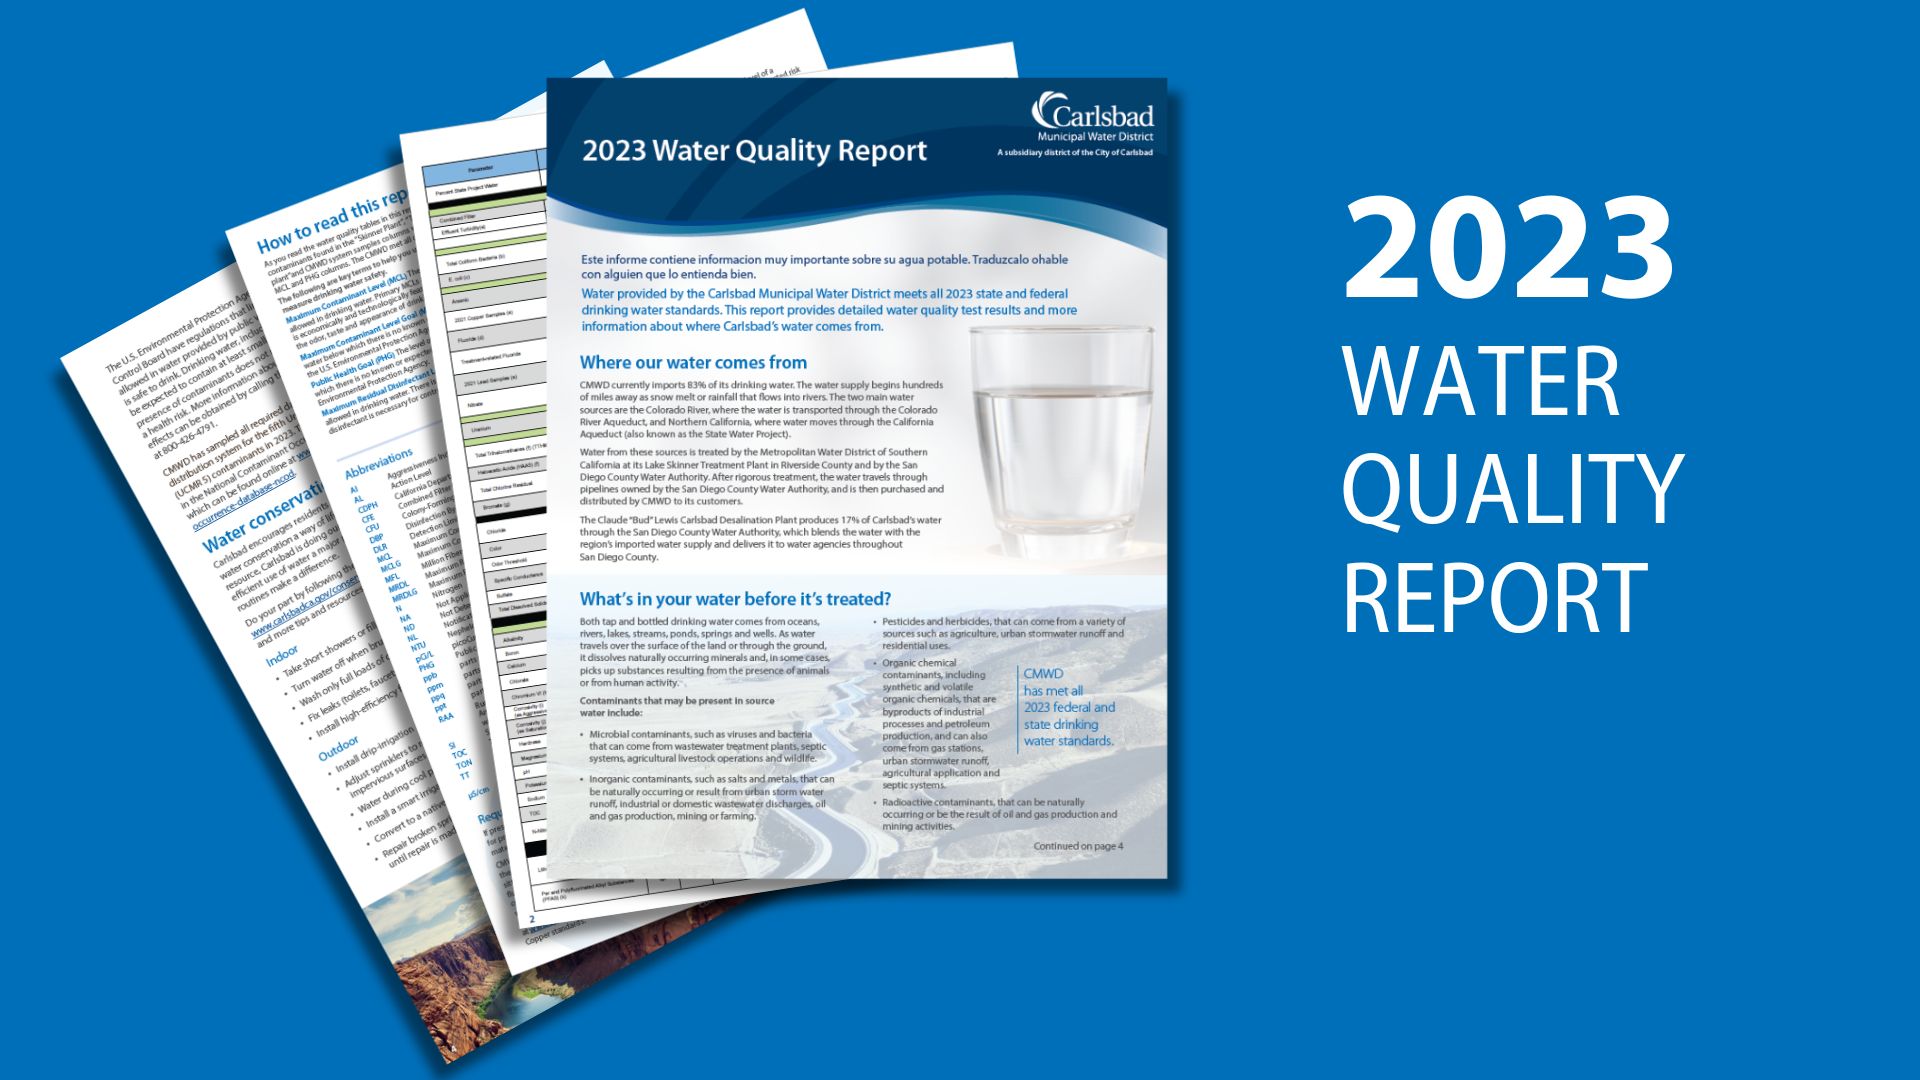 2023 Water Quality Report web banner